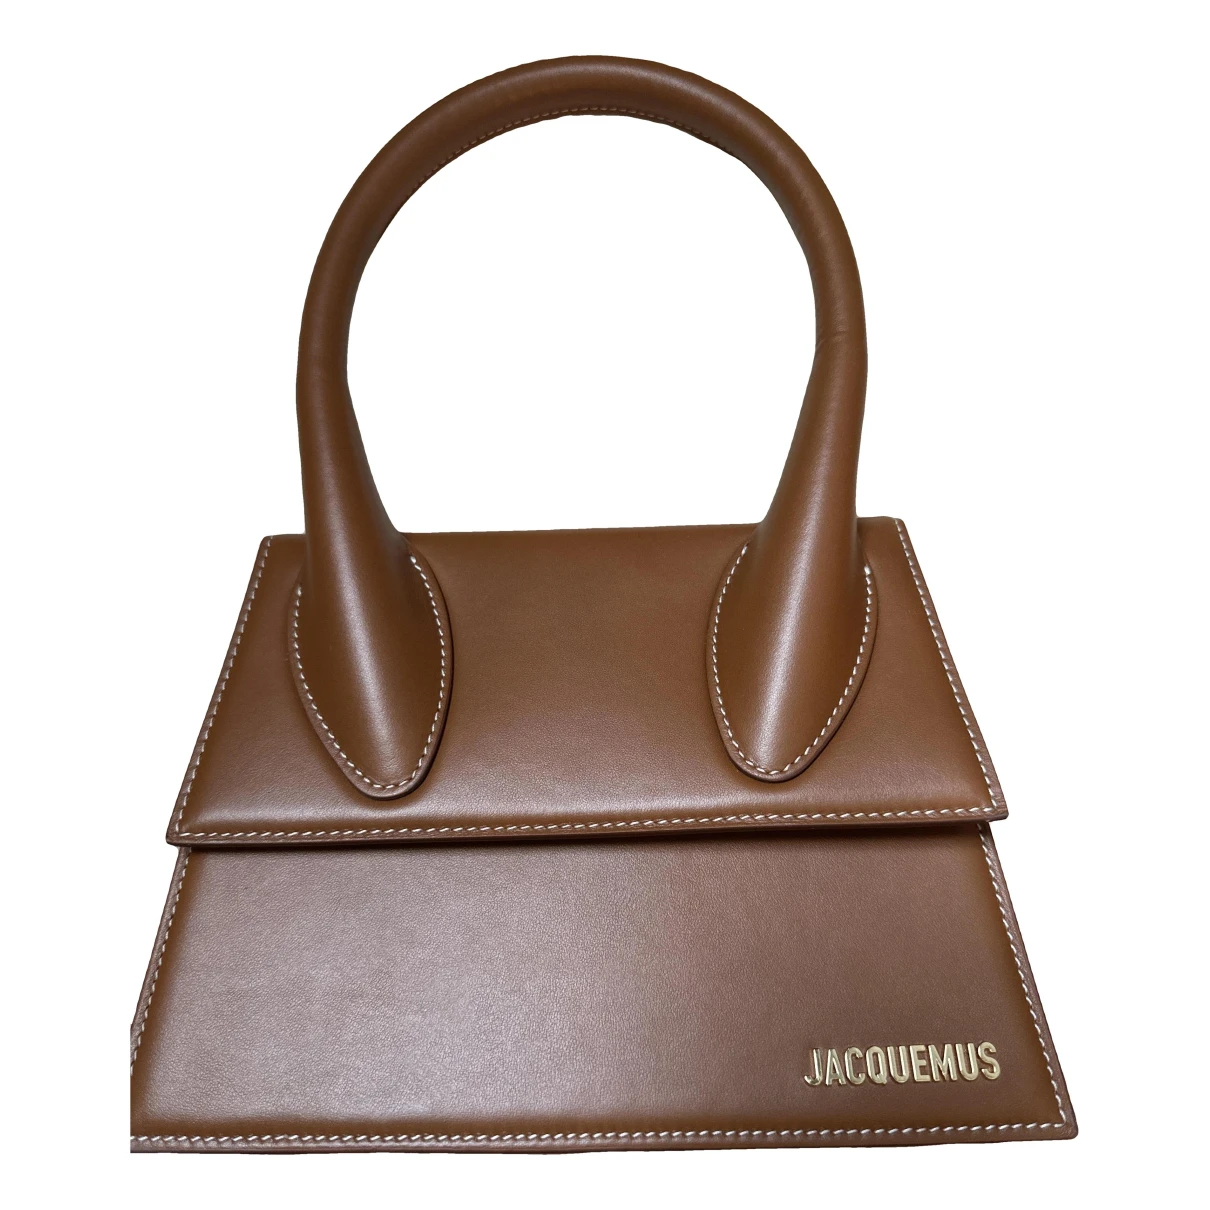 Pre-owned Jacquemus Chiquito Leather Handbag In Brown